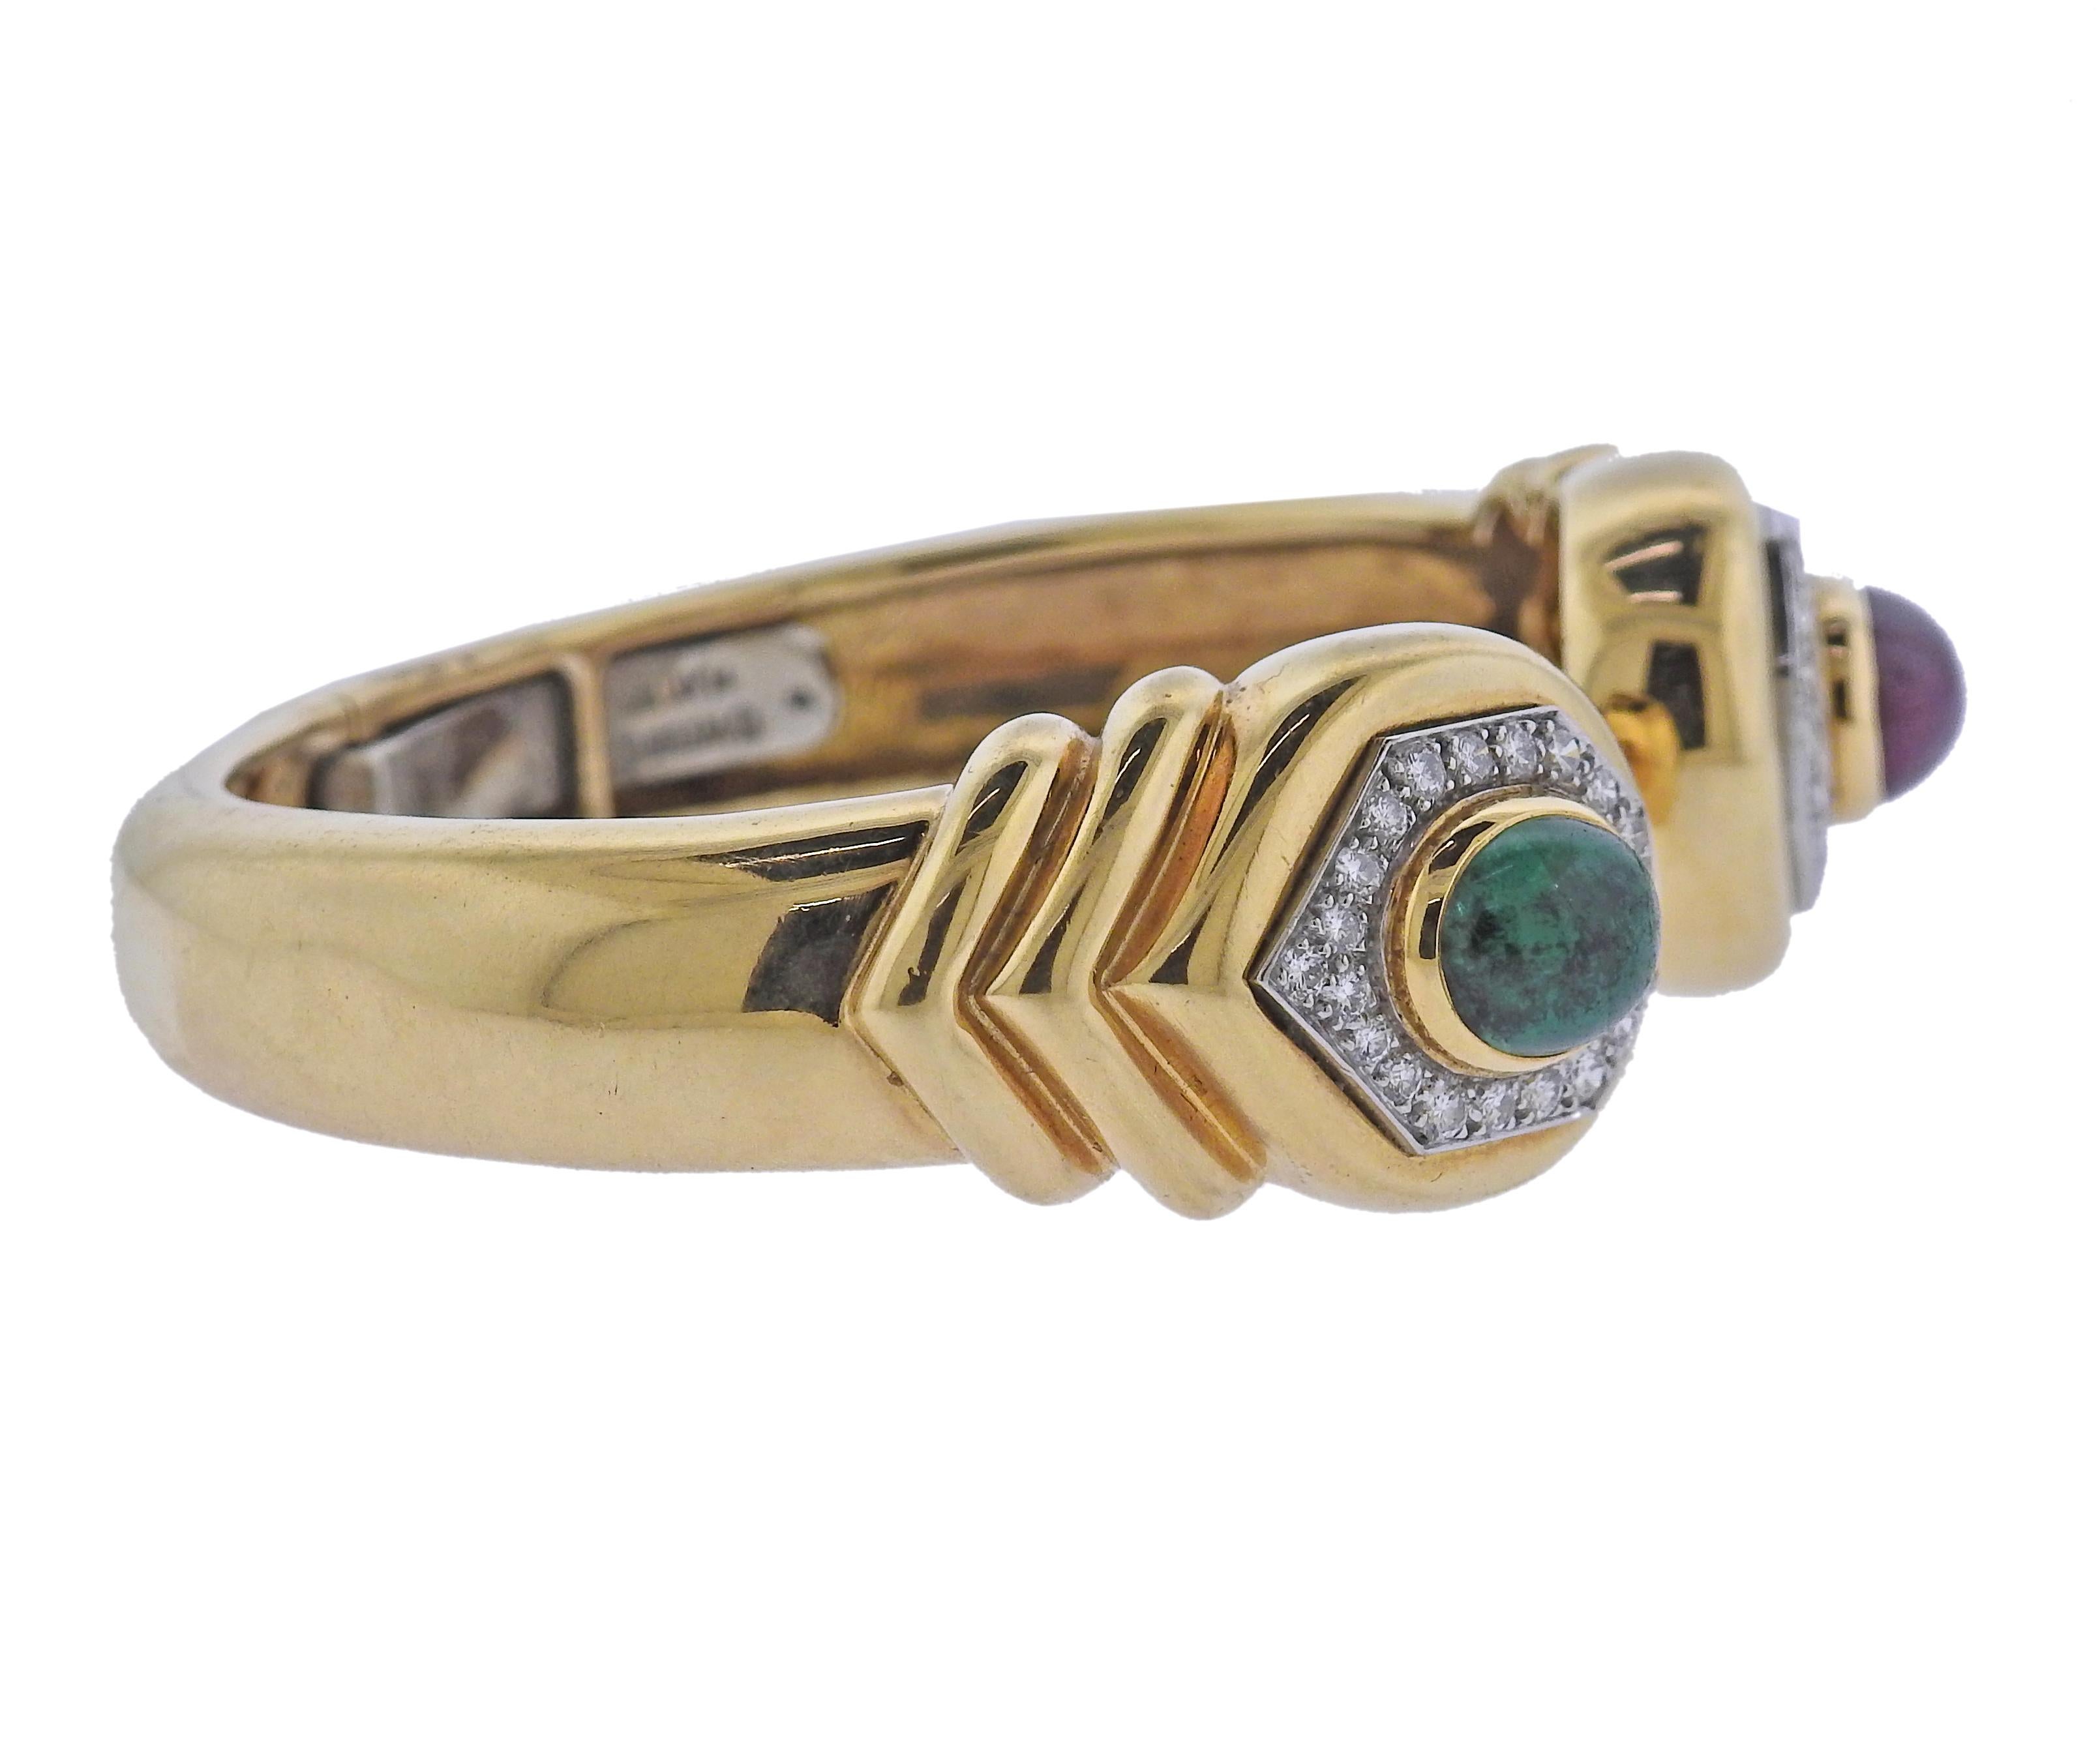 18k gold and platinum cuff bracelet by David Webb, decorated with approx. 1.20ctw in diamonds and 10.6mm x 8.4mm ruby and emerald cabochons. Bracelet will fit up to 7